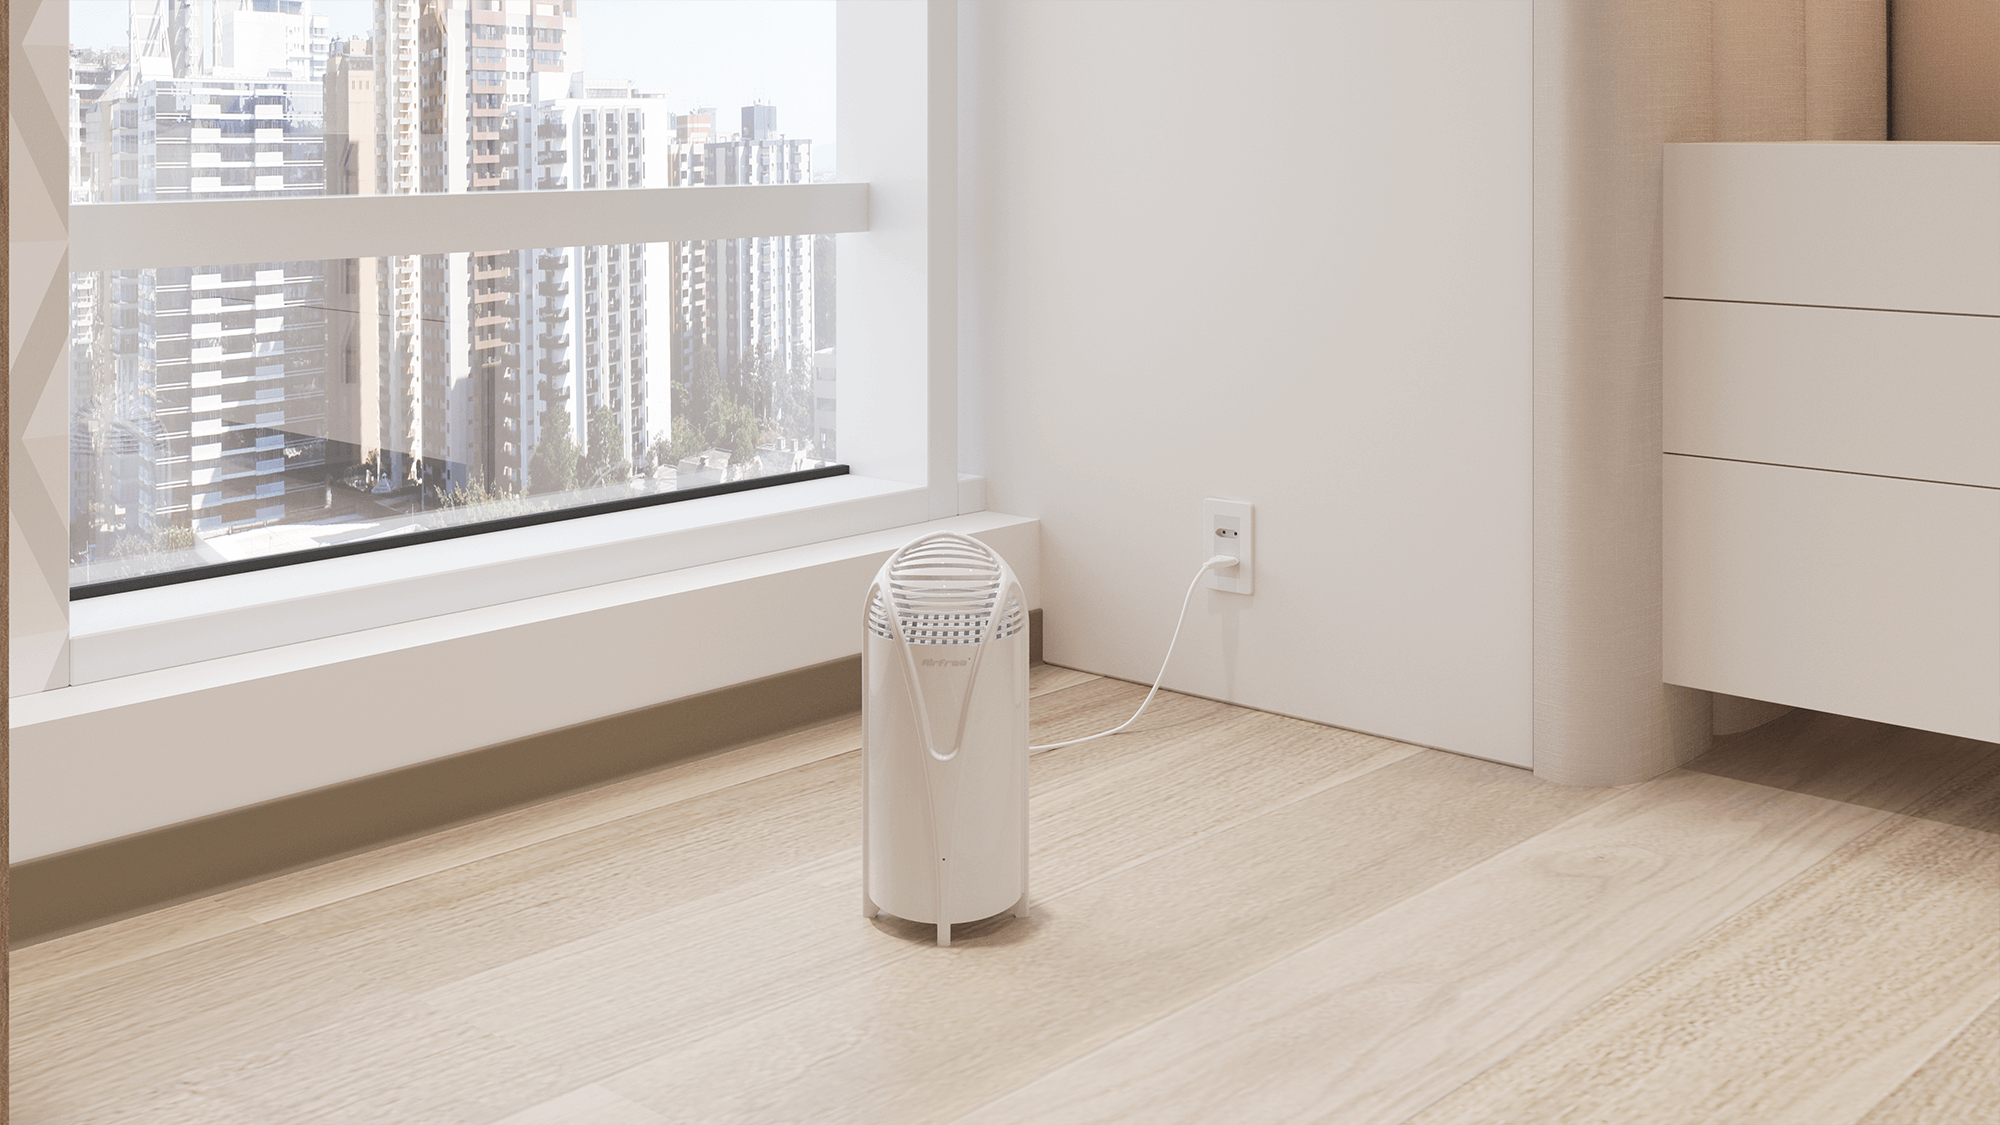 Image of a filterless air purifier with a price tag under $100